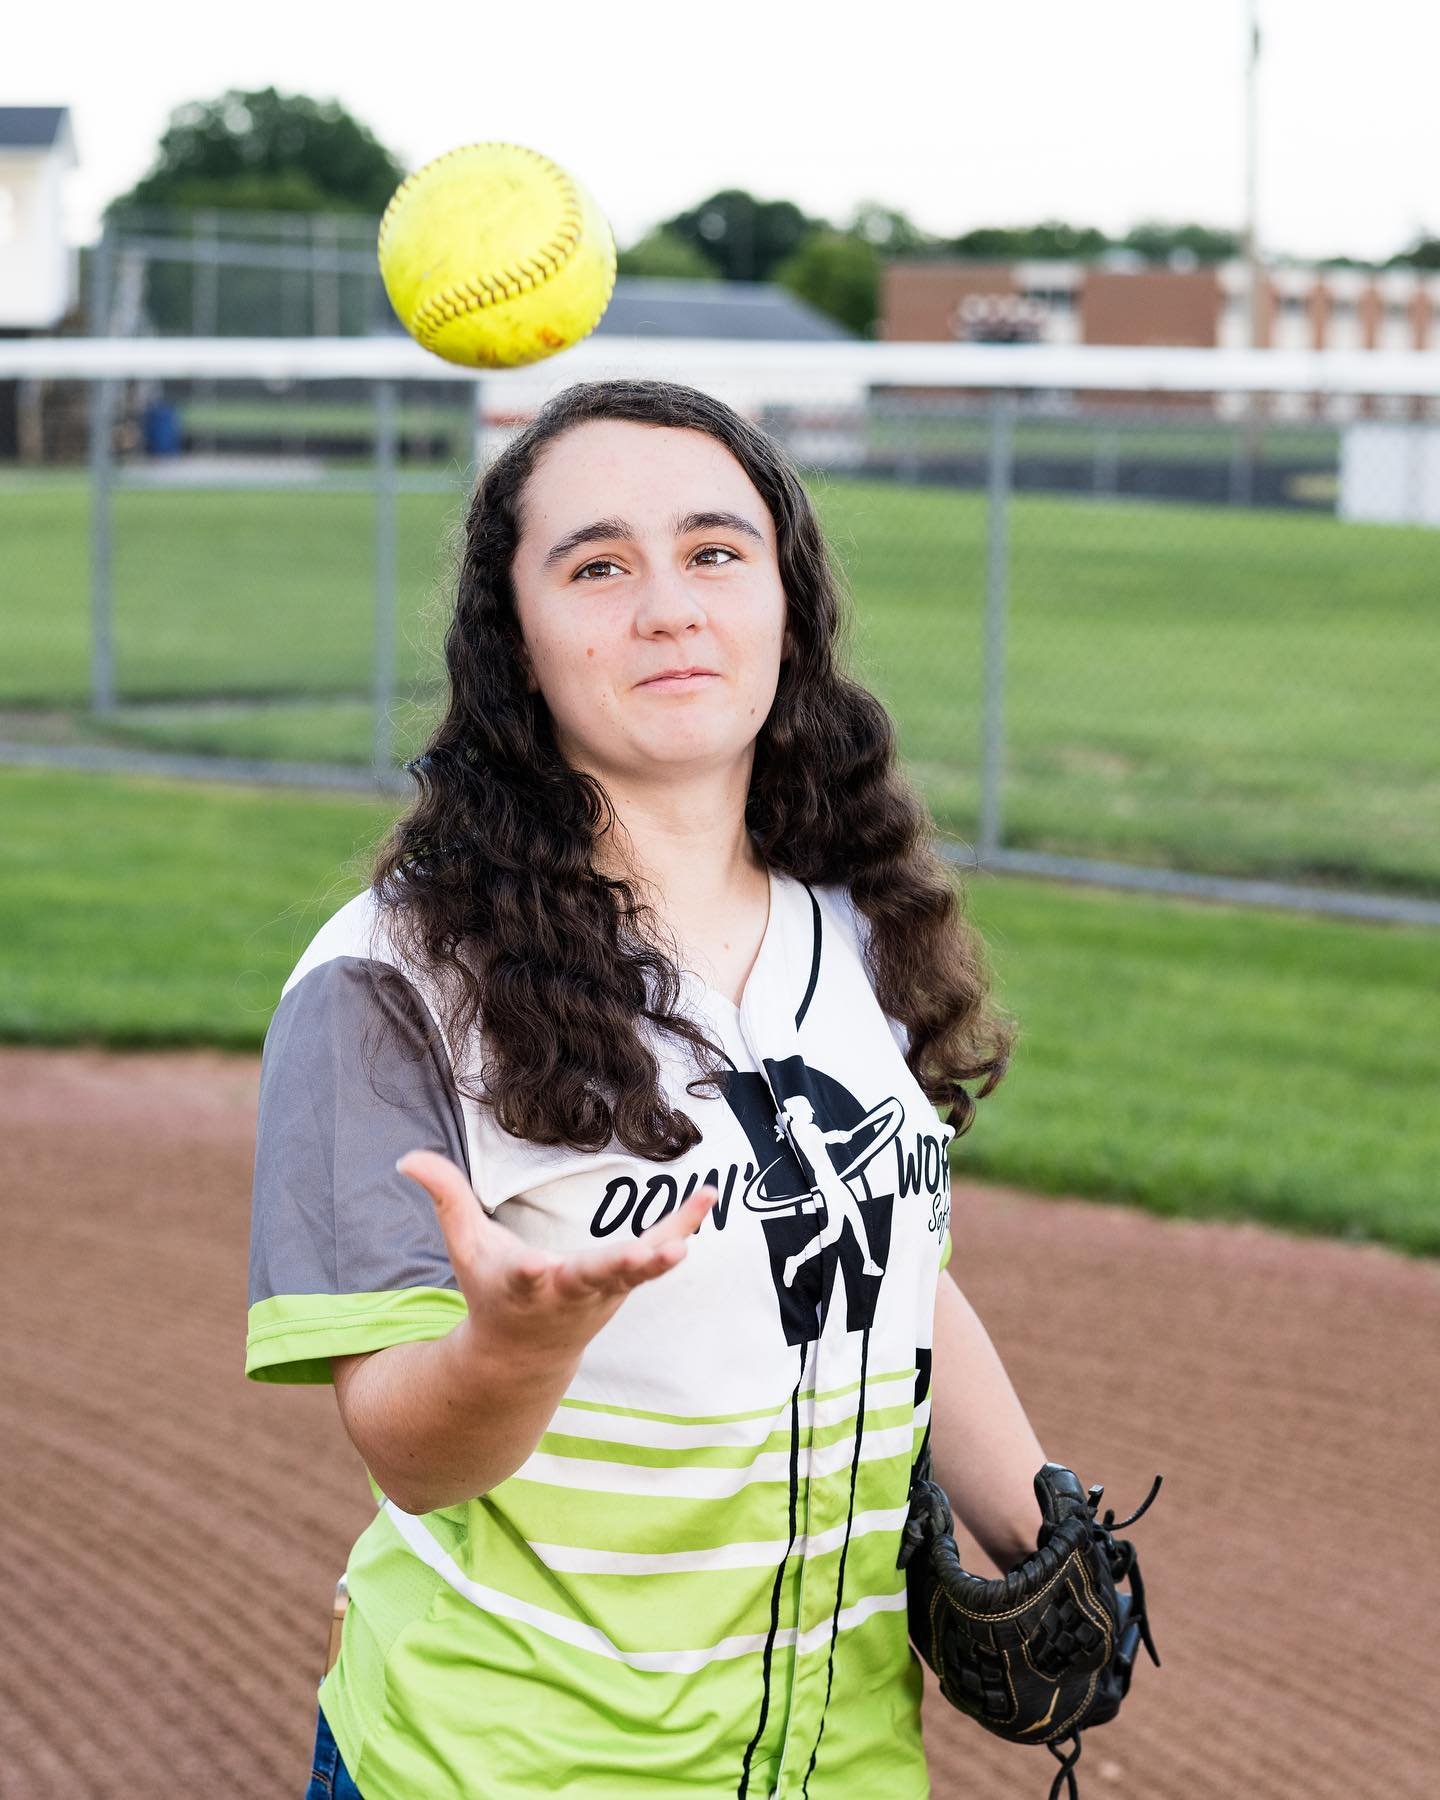 How many times do you think we had to have her throw the ball before we got the shot?

#toledoseniorphotographer #toledoseniorphotography #otsegohighschool #softballsenior #softballseniorpics #bowlinggreenohio #bowlinggreenseniorphotographer #bgohio 